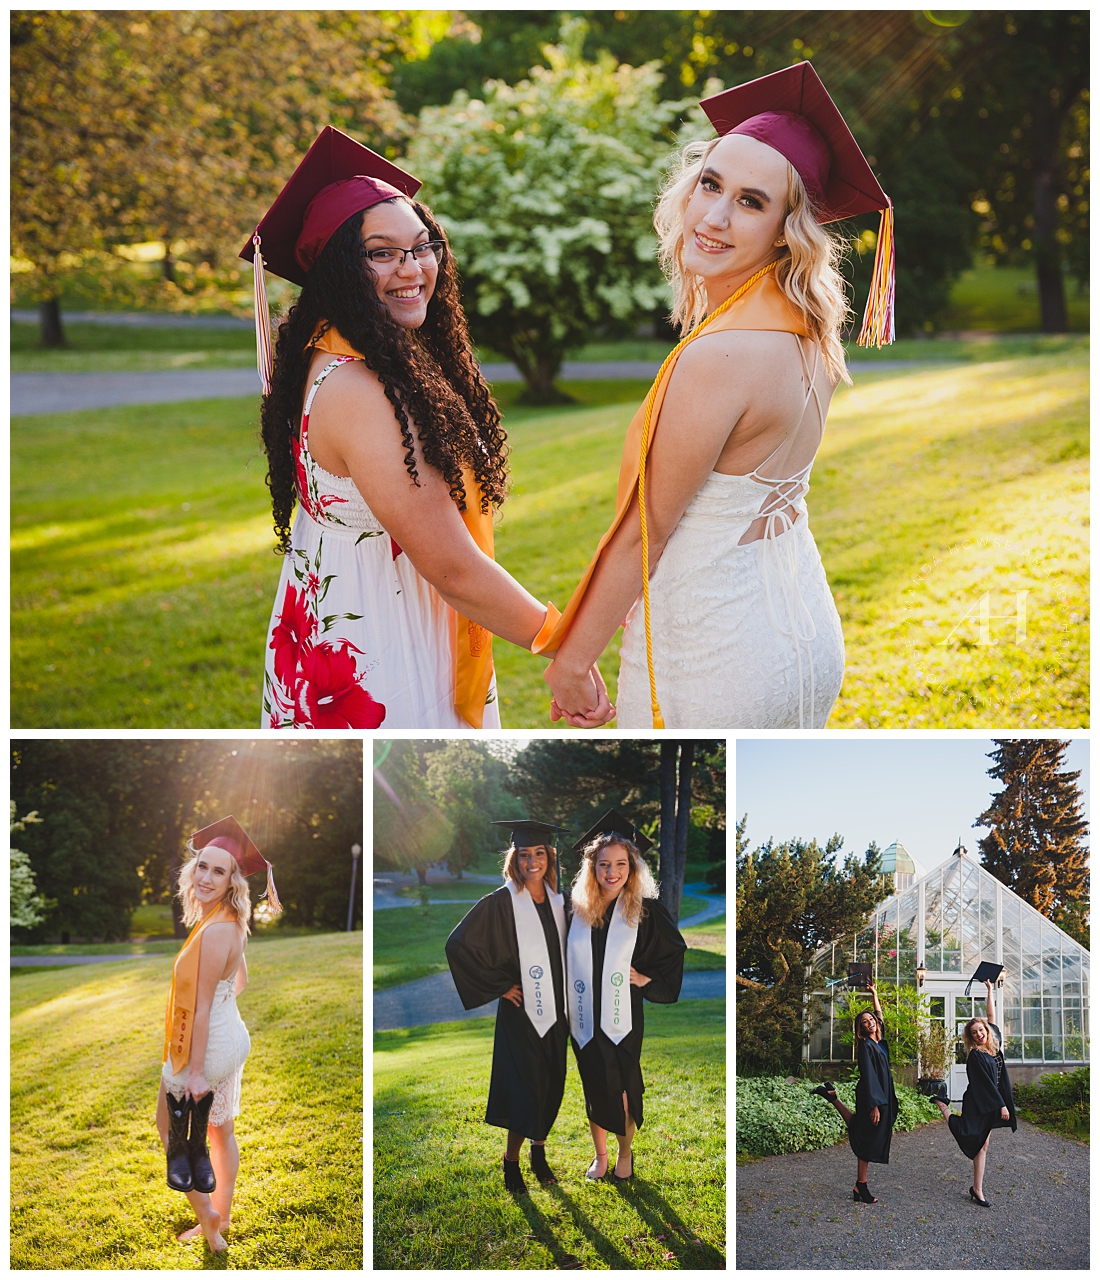 Wright Park Senior Portraits with Your Best Friend | Wear Your Cap and Gown to this Awesome Type of Session | Photographed by the Best Tacoma Senior Portrait Photographer Amanda Howse